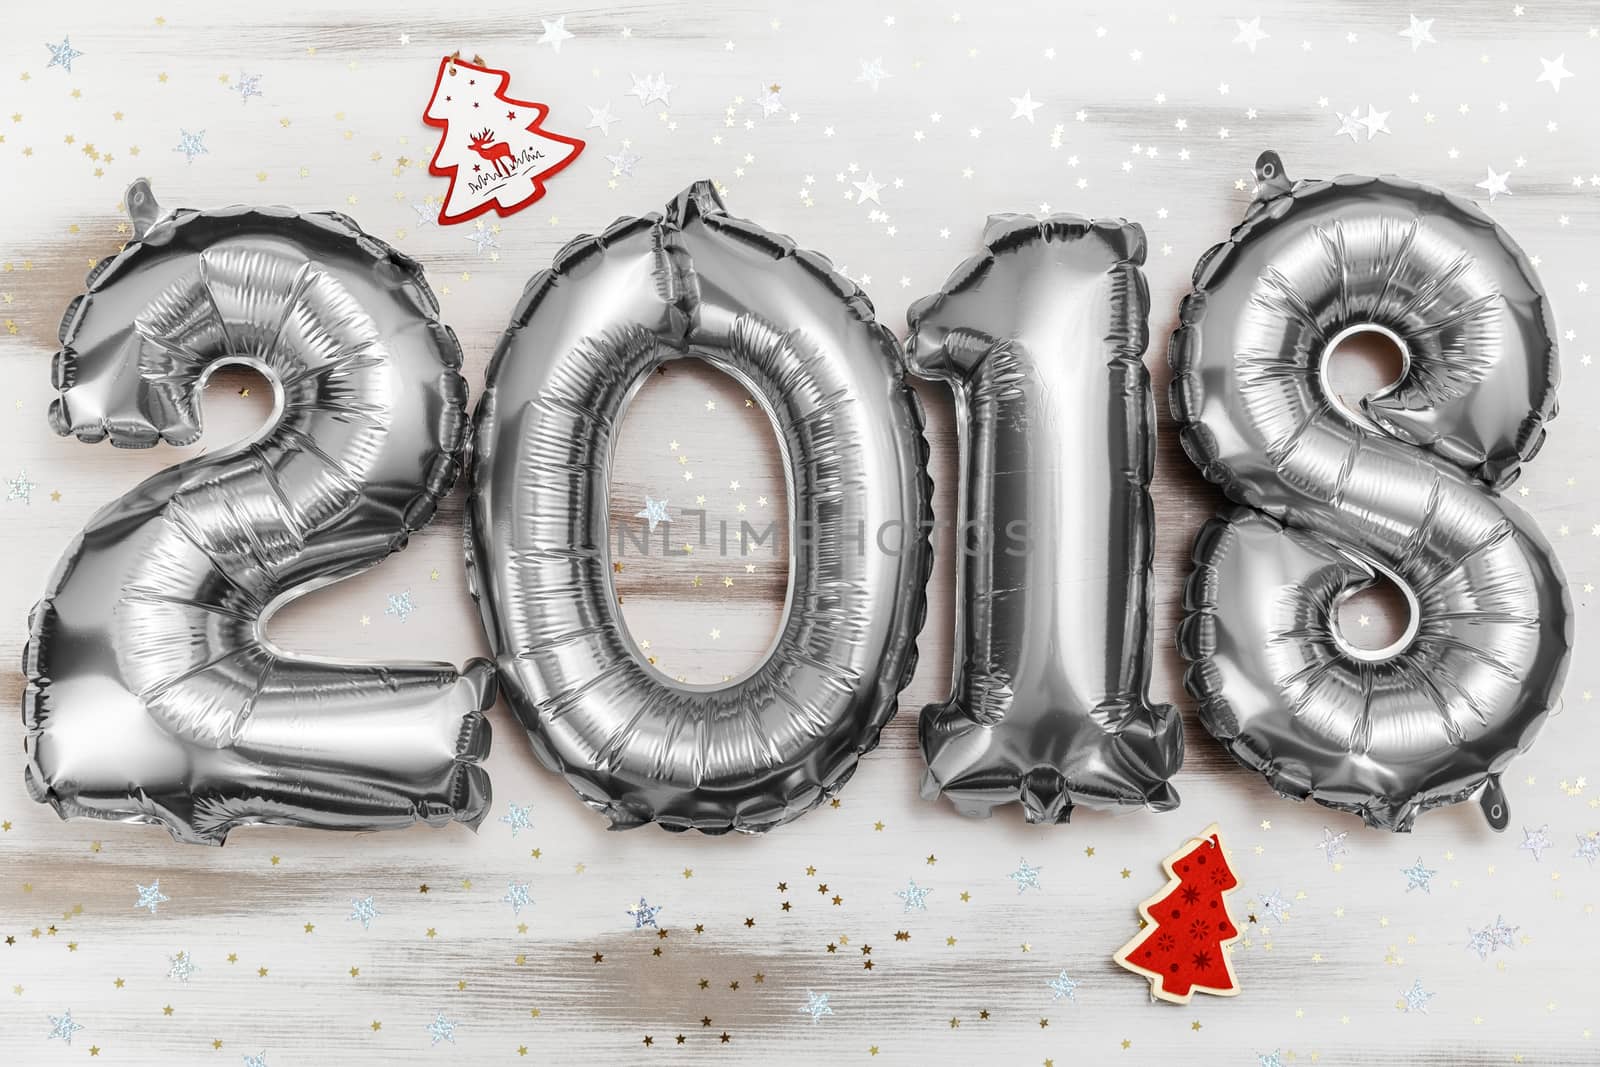 Bright silver balloons figures 2018, New Year Balloons with glitter stars on white wood table background. Christmas and new year celebration